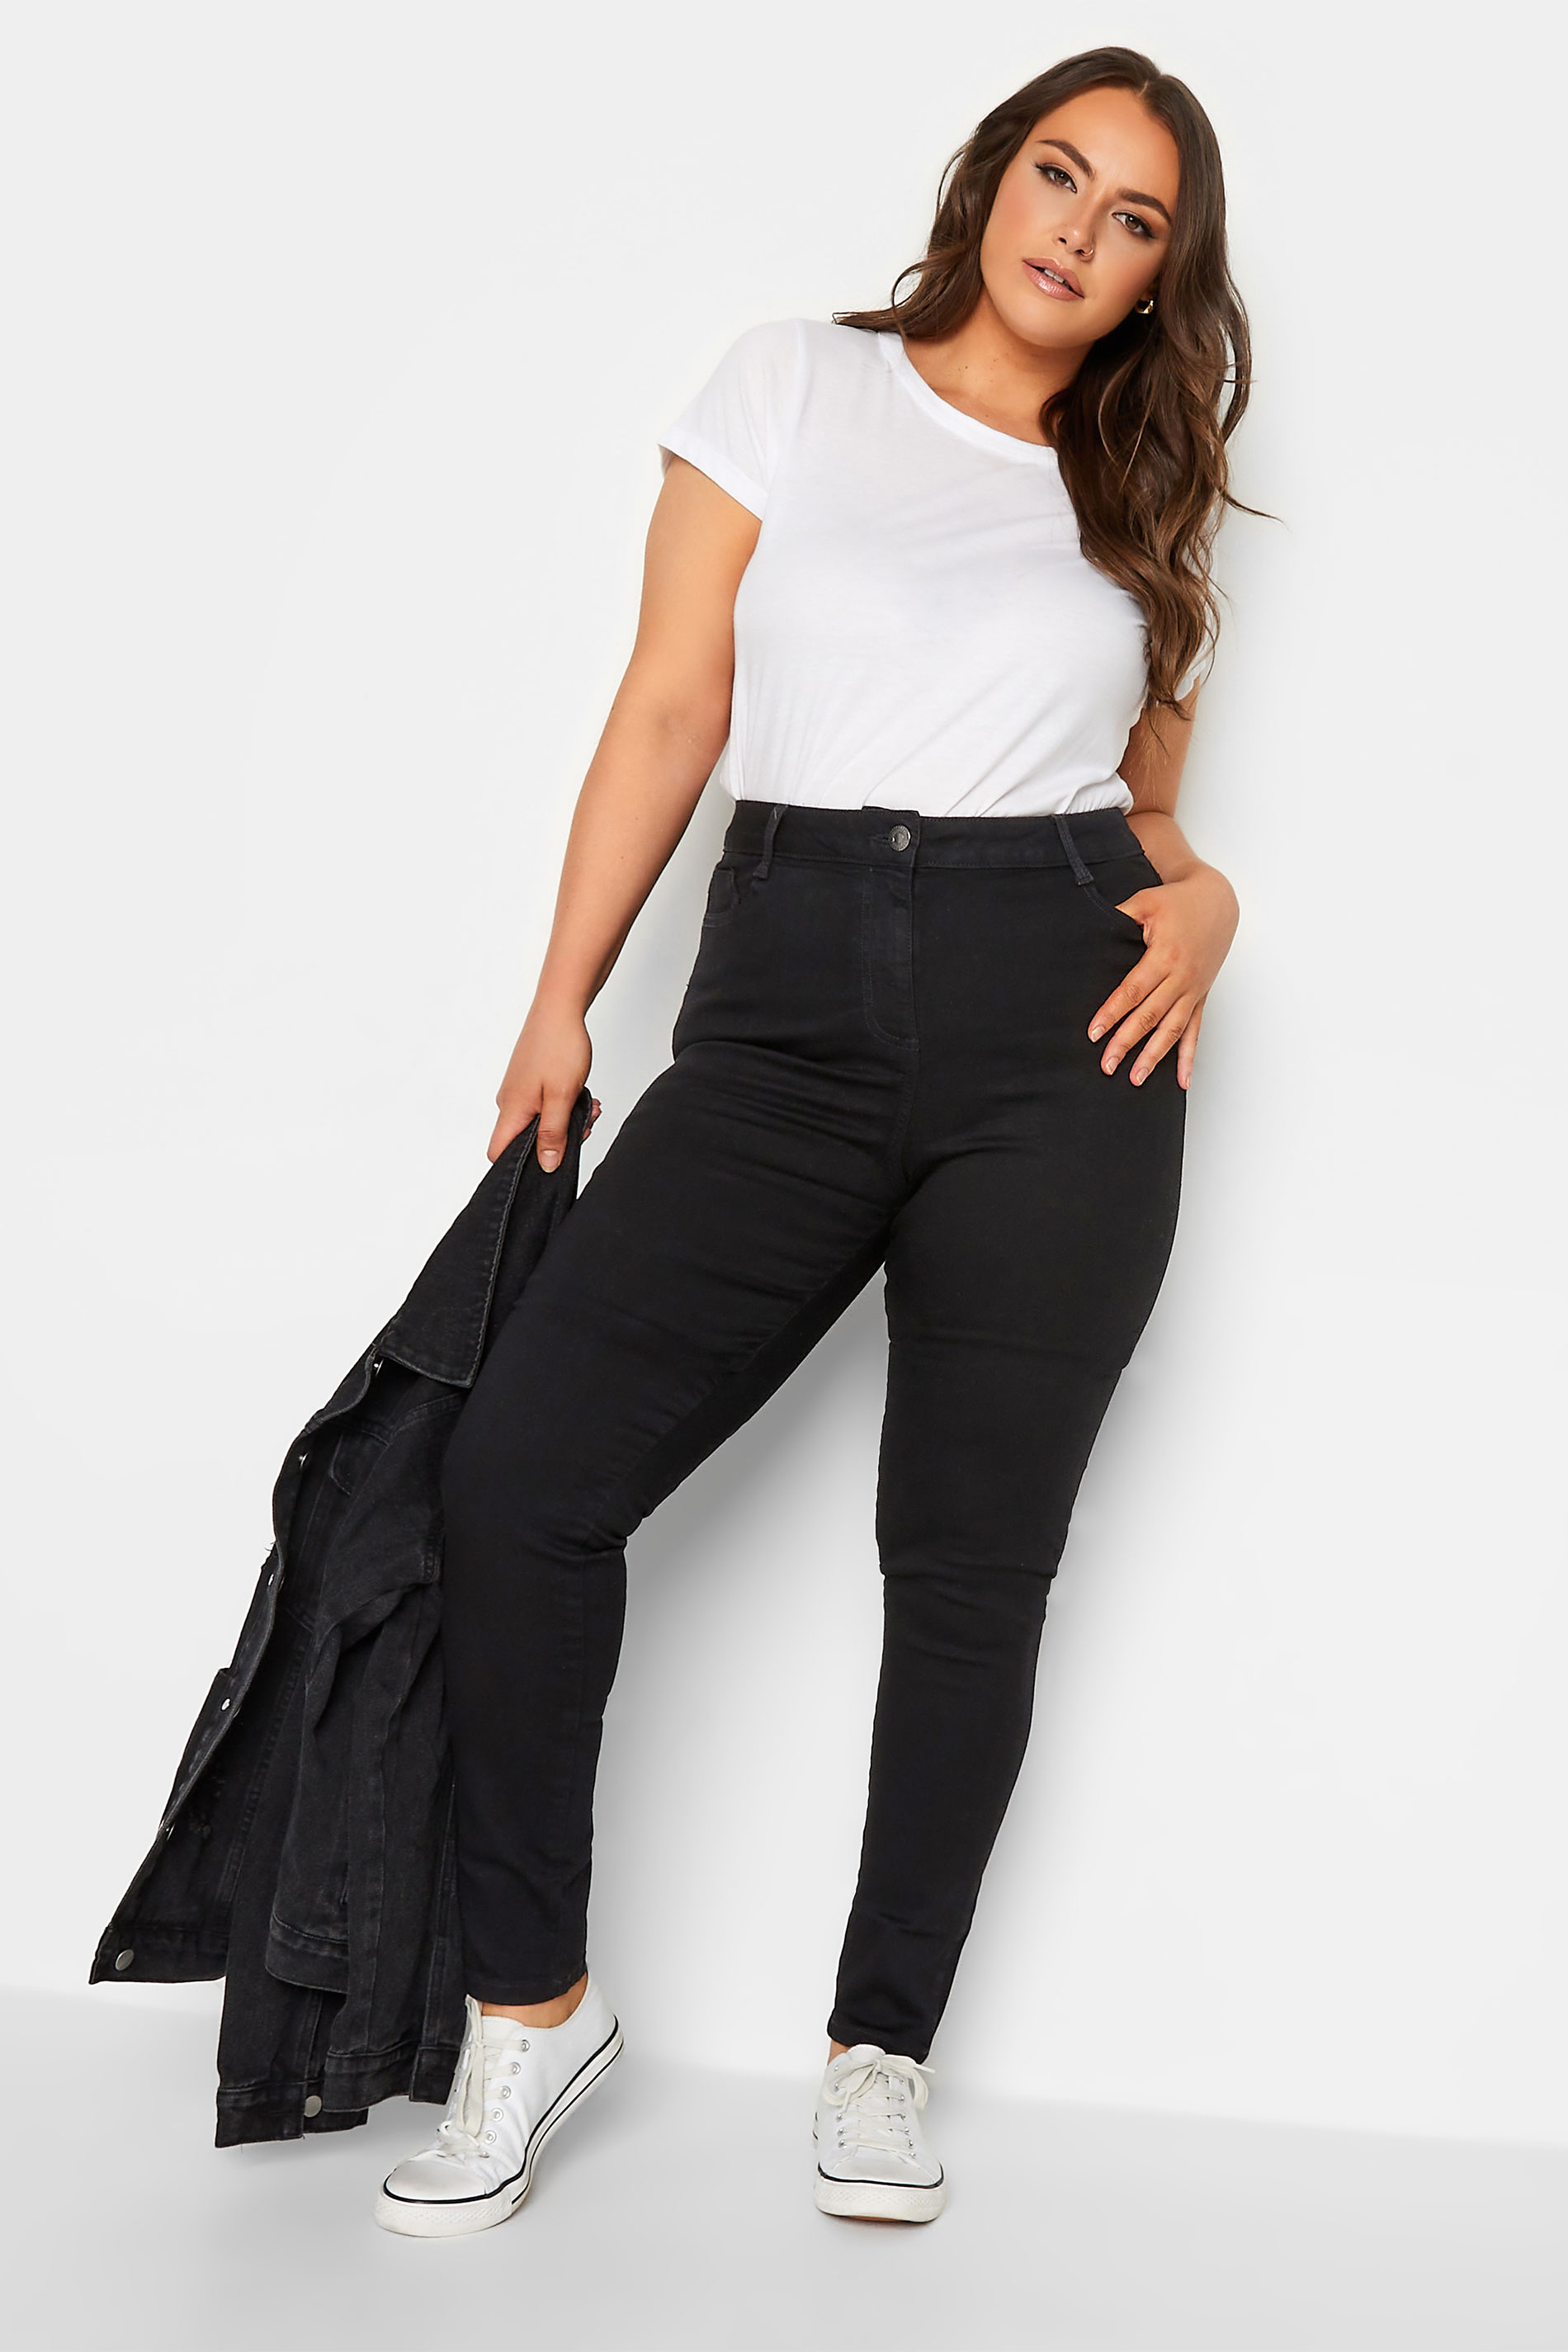 Plus Size Black Skinny Stretch AVA Jeans | Yours Clothing 3